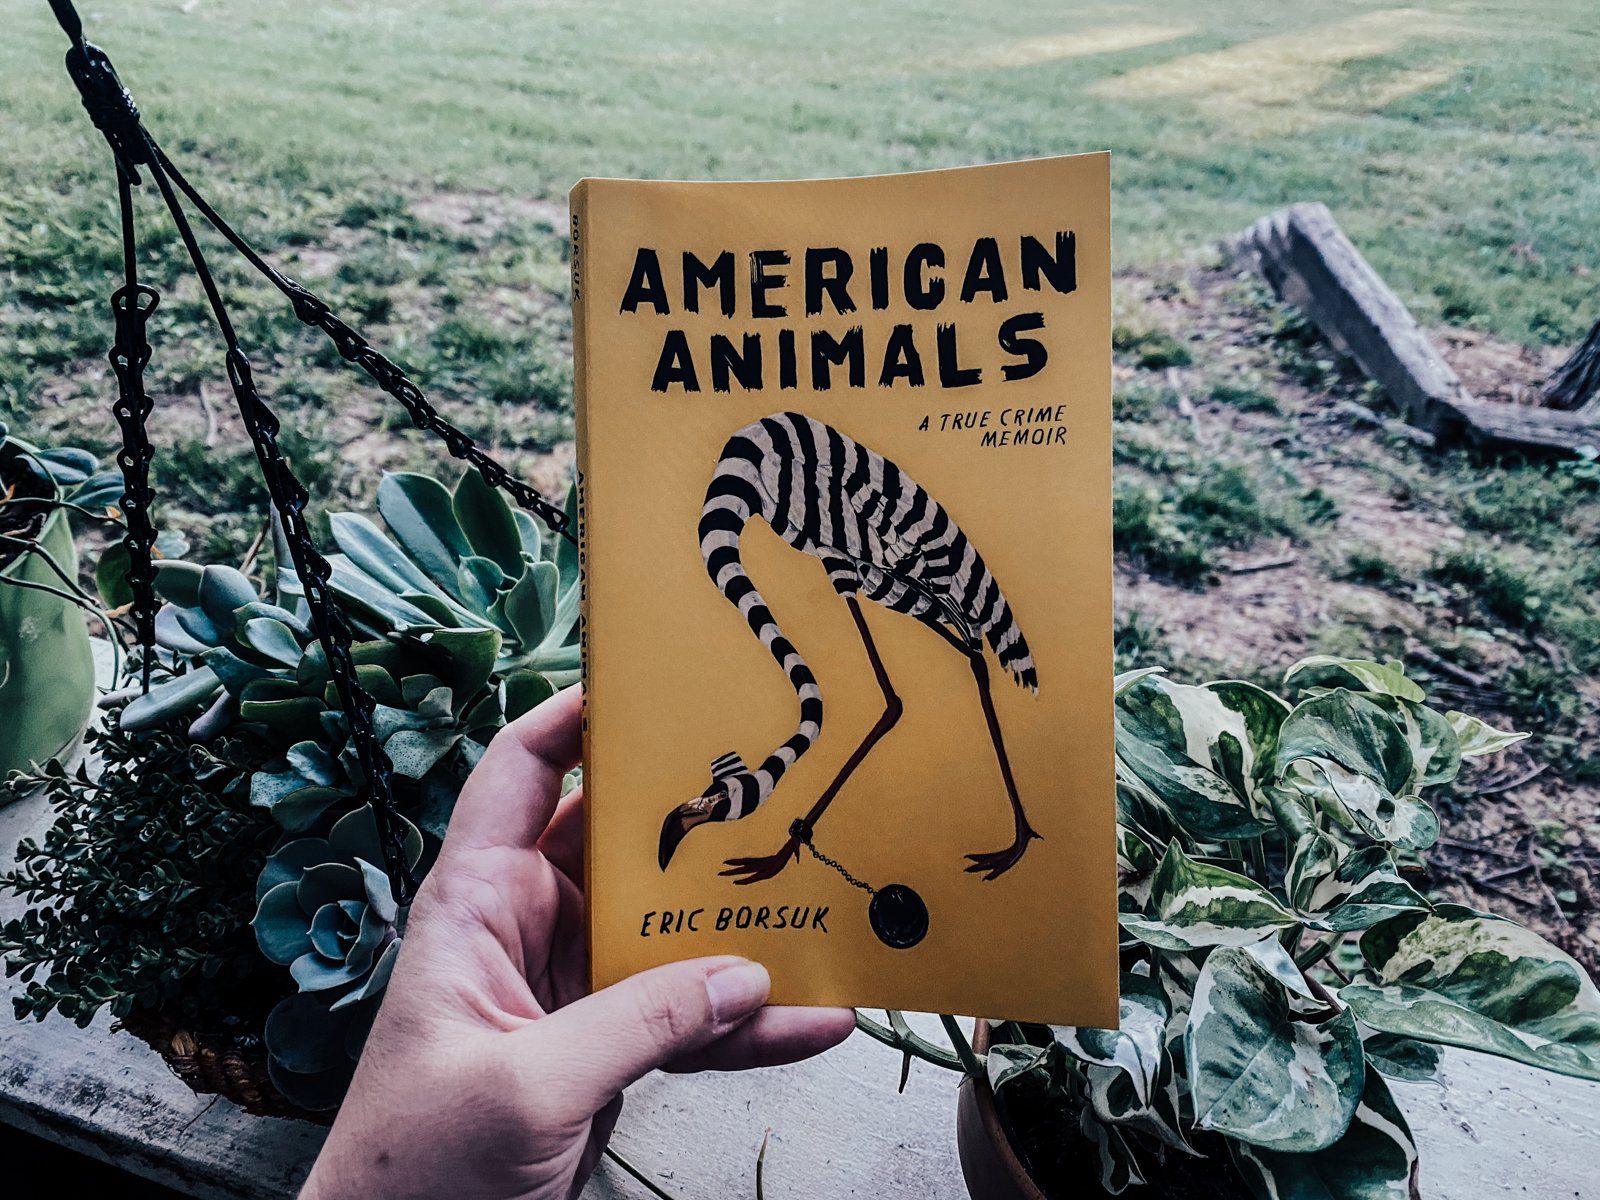 You are currently viewing American Animals: A True Crime Memoir by Eric Borsuk